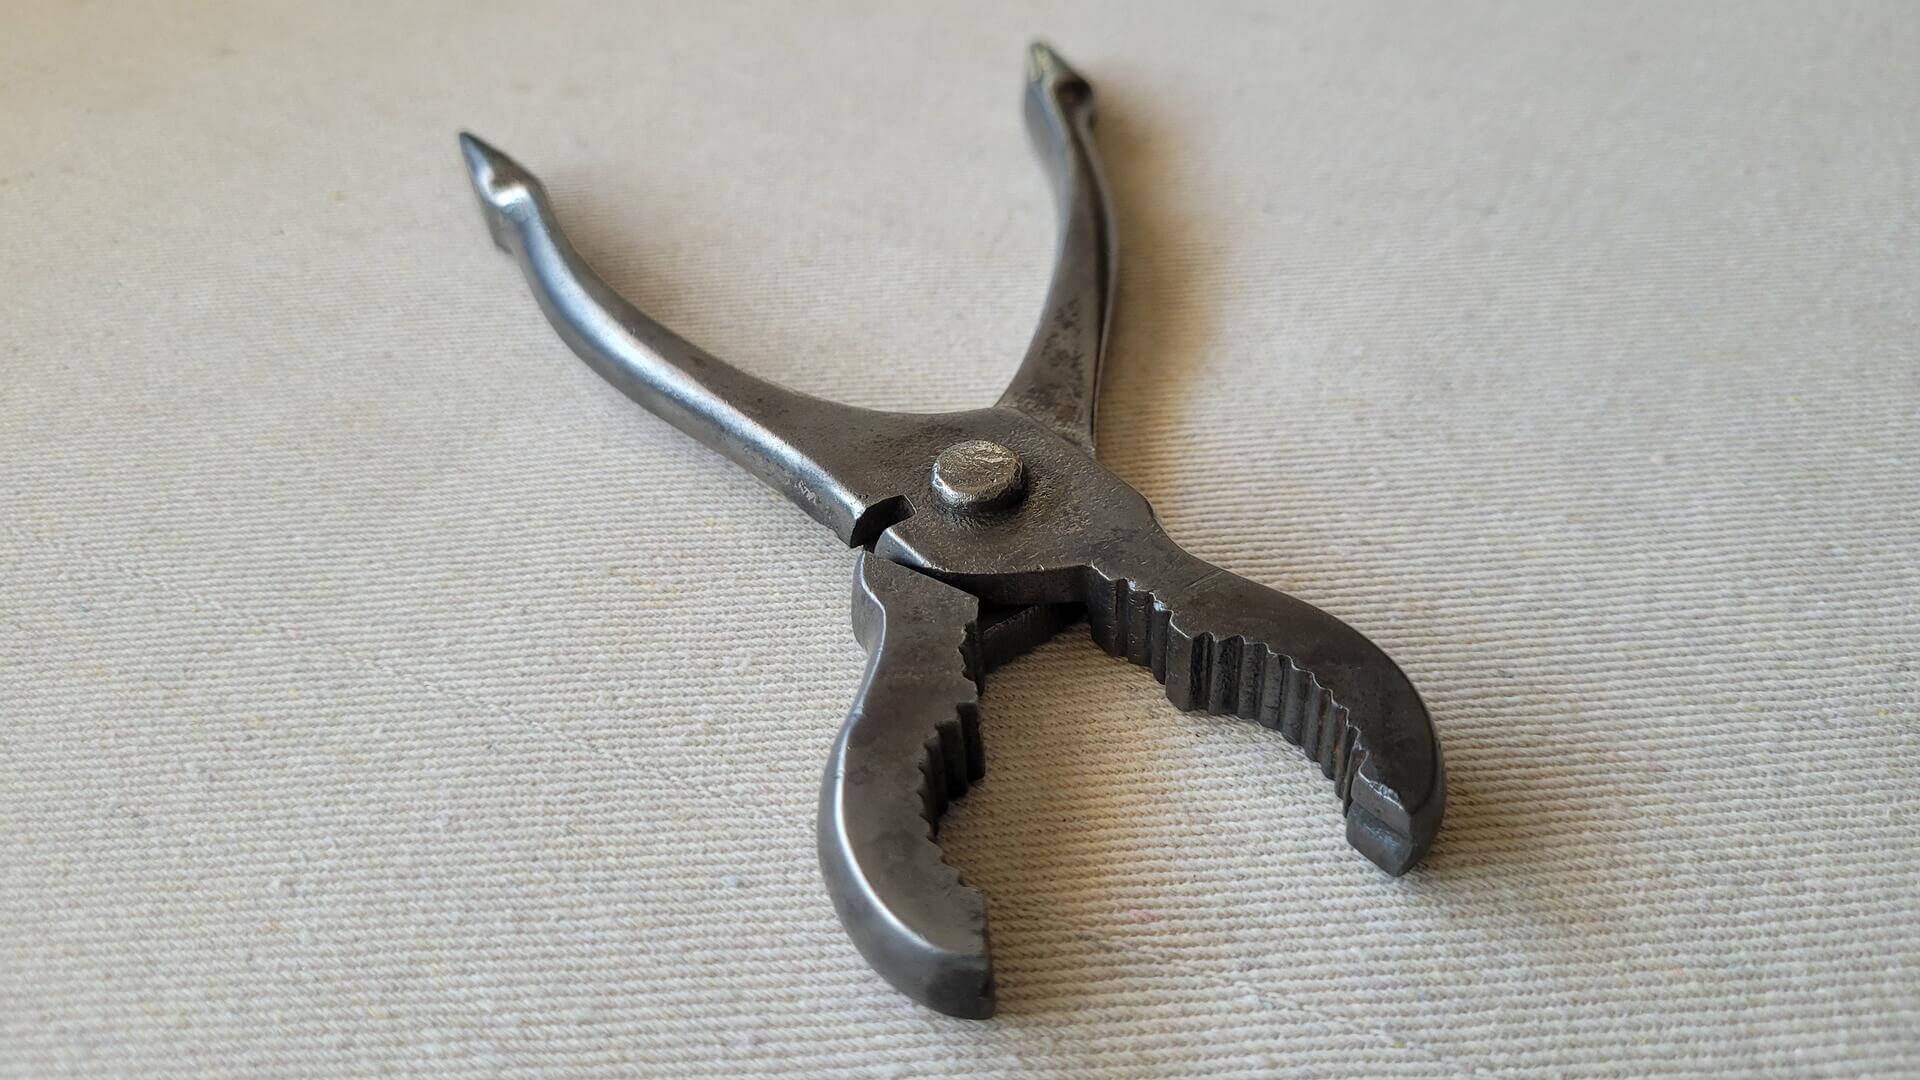 Antique gas and burner pliers w 2 curved jaws for pipework, pipe reamer & screw handles. Vintage made in USA collectible plumbing & gas fitter hand tools